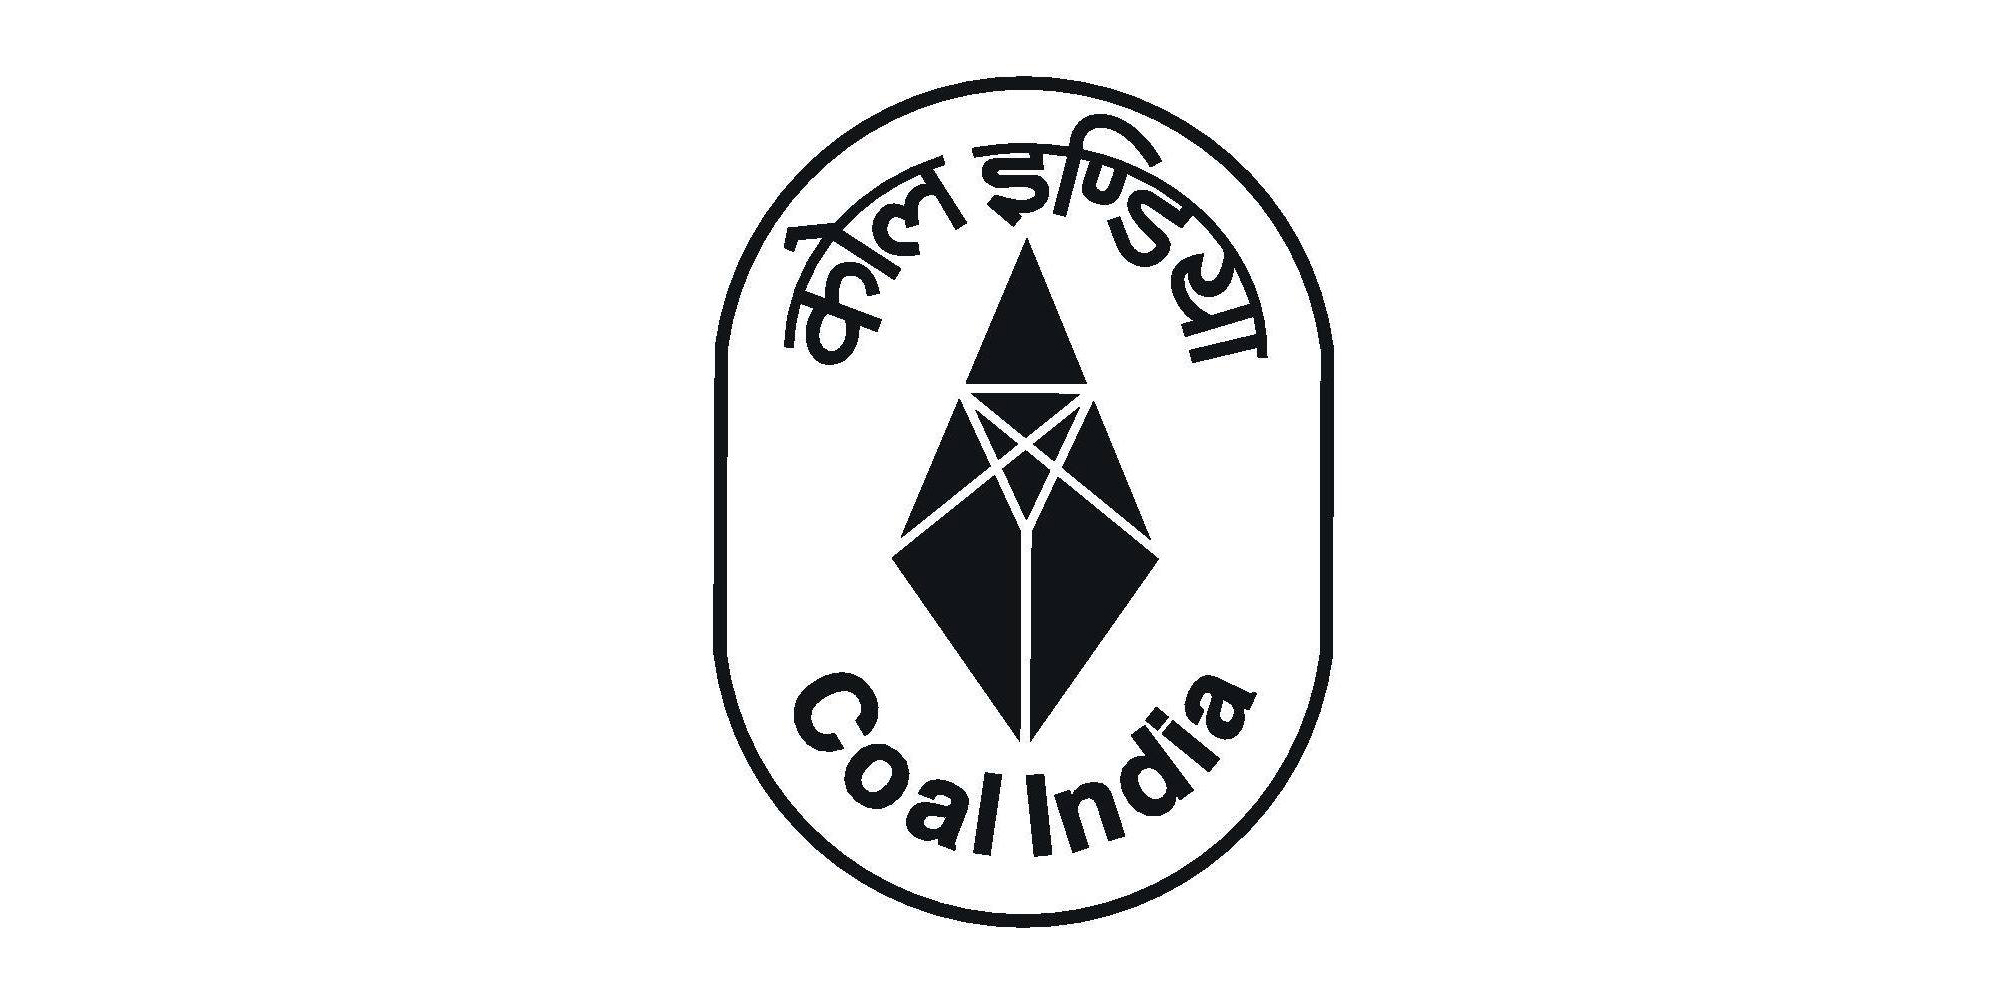 CIL’s CSR spend higher than statutory requirement